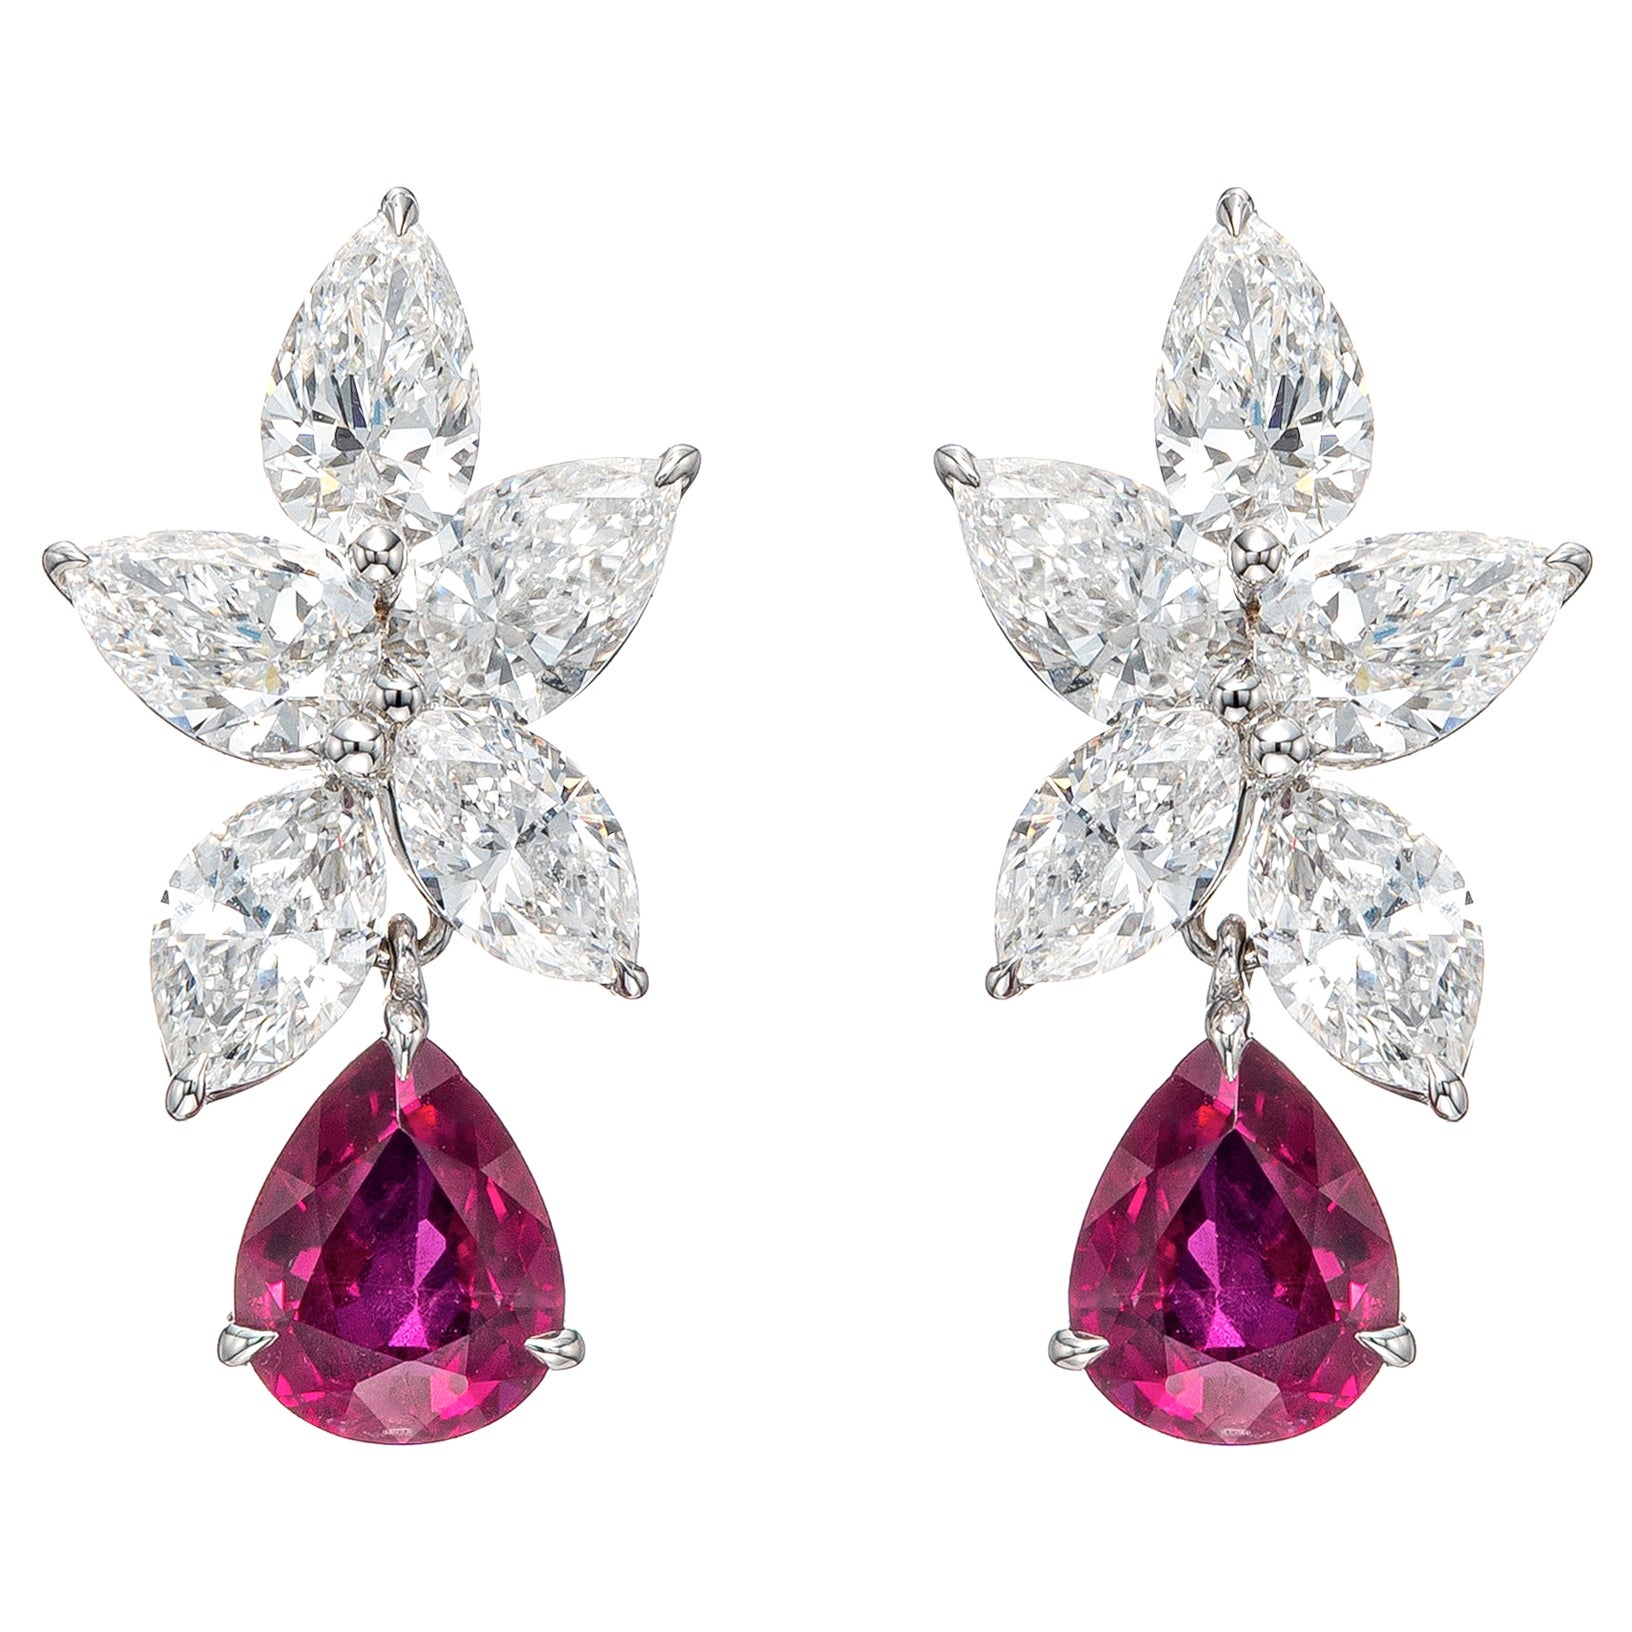 3.08 Carat Pear Shape Ruby and Diamond Cluster Earrings in 18K White Gold For Sale